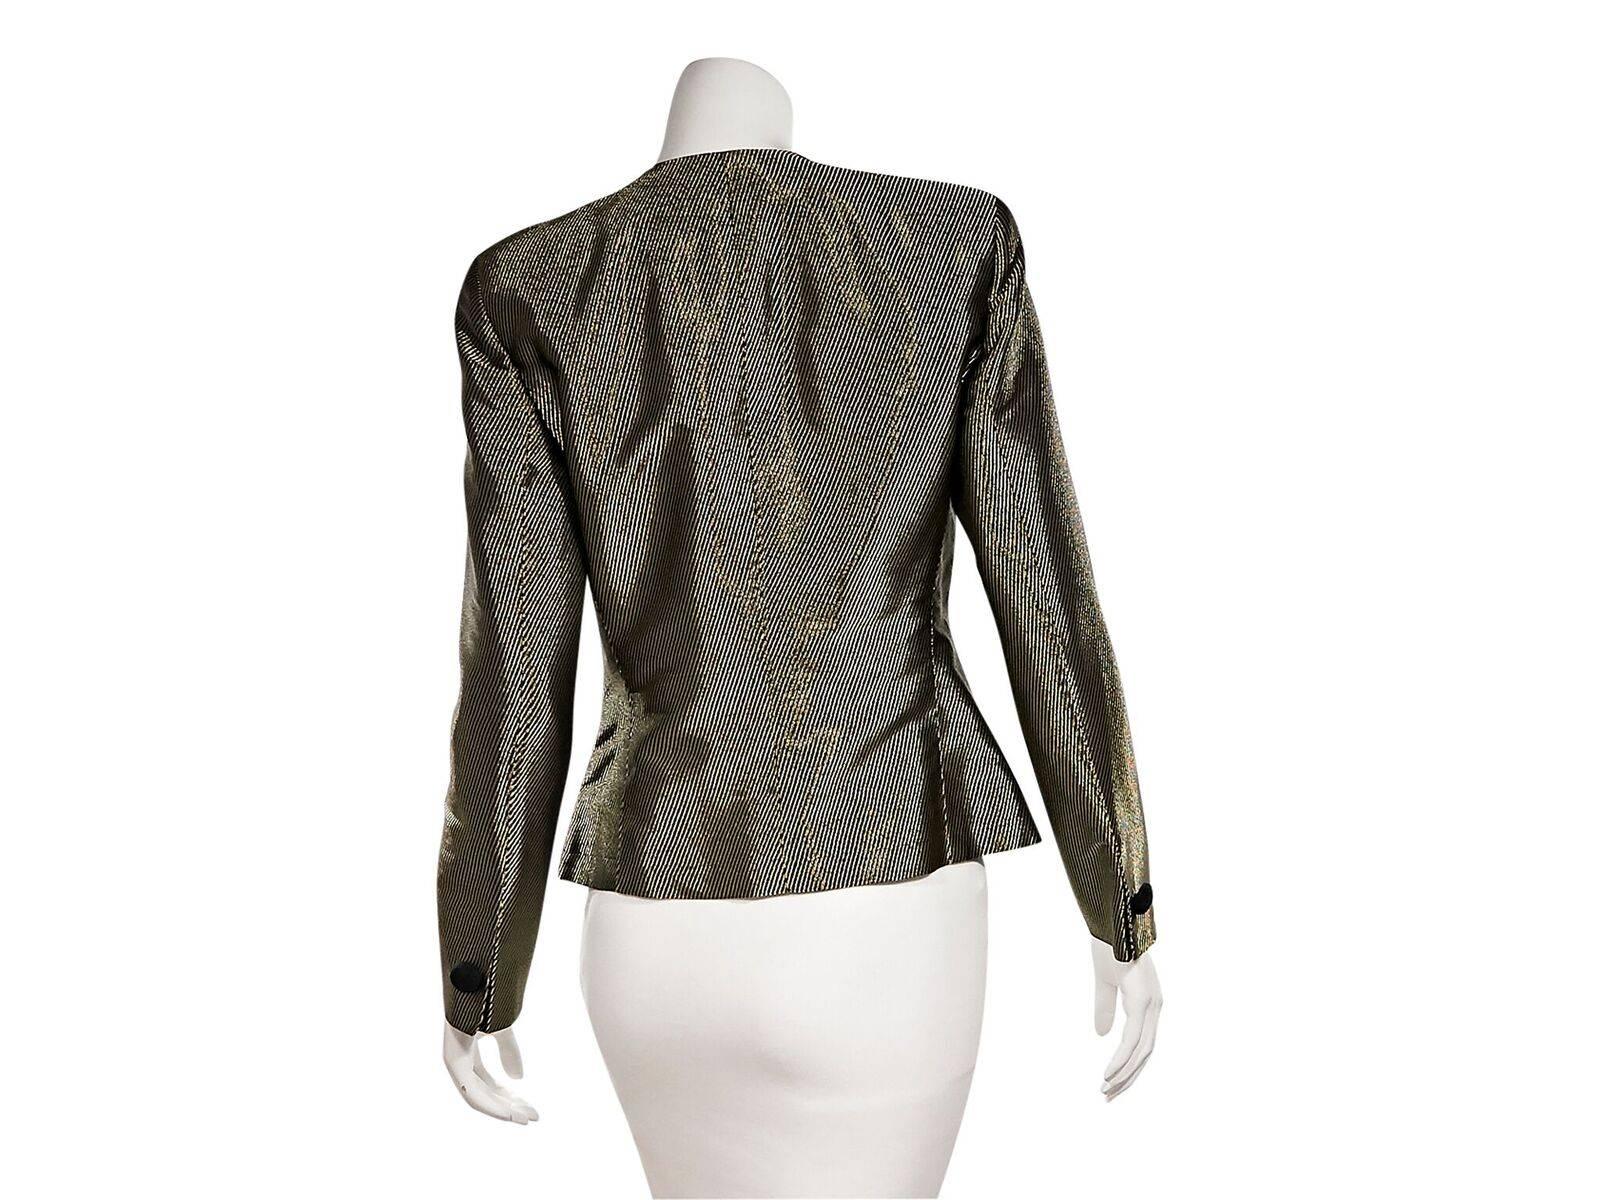 Product details:  Metallic gold and black twill blazer by Giorgio Armani.  Crewneck.  Long sleeves.  Single button cuffs.  Button-front closure.  Princess seams create a flattering silhouette. 
Condition: Pre-owned. Very good.
Est. Retail $525